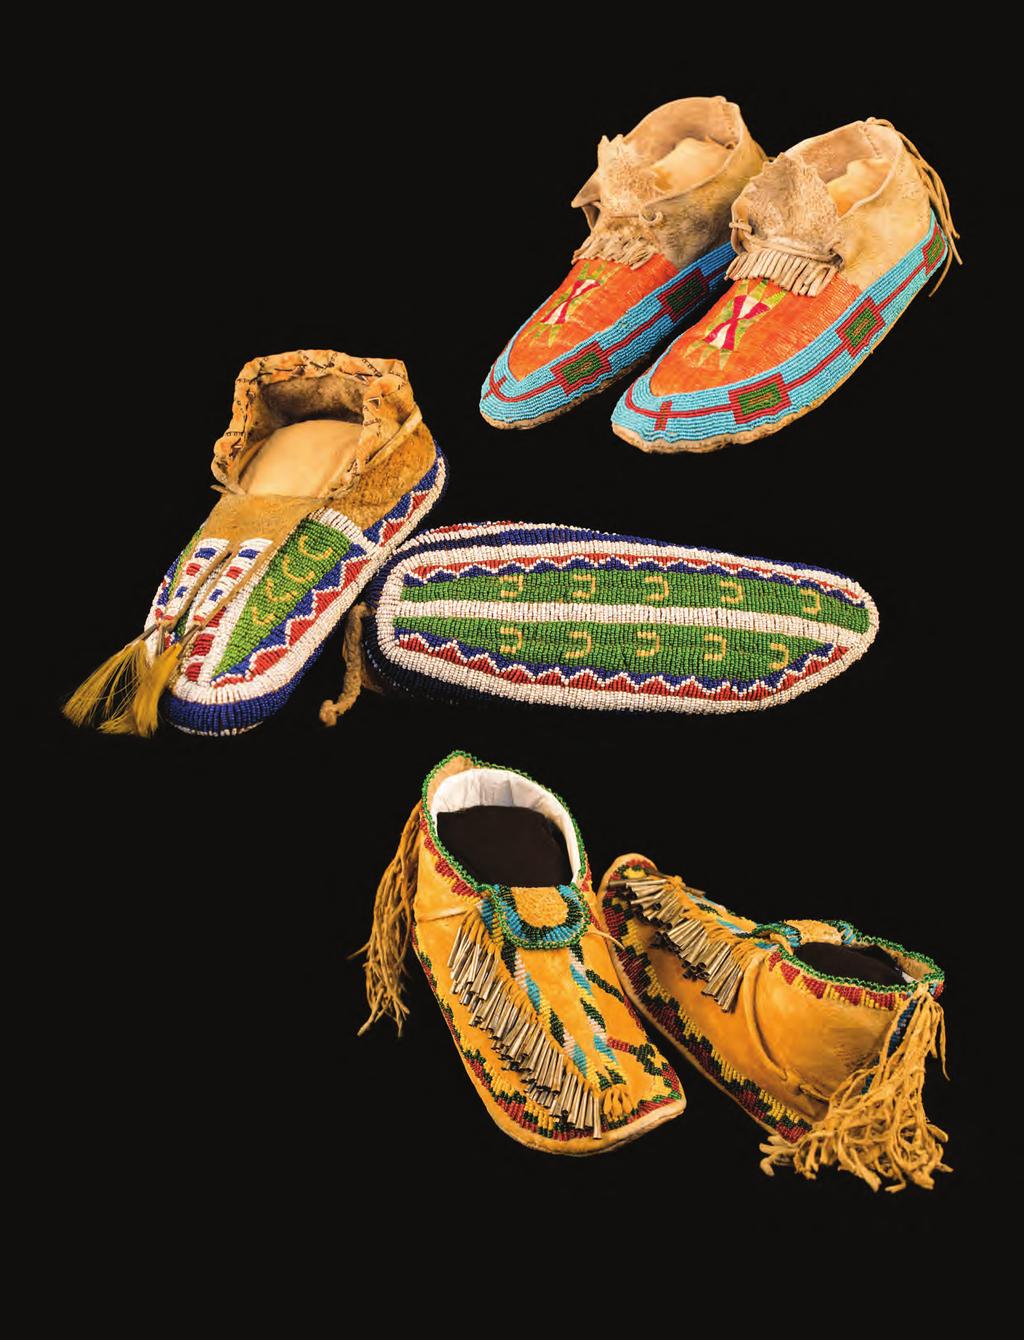 Top: Hidatsa and Cree quilled and beaded moccasins, ca. 1870 1880s. MIAC 45360/12.